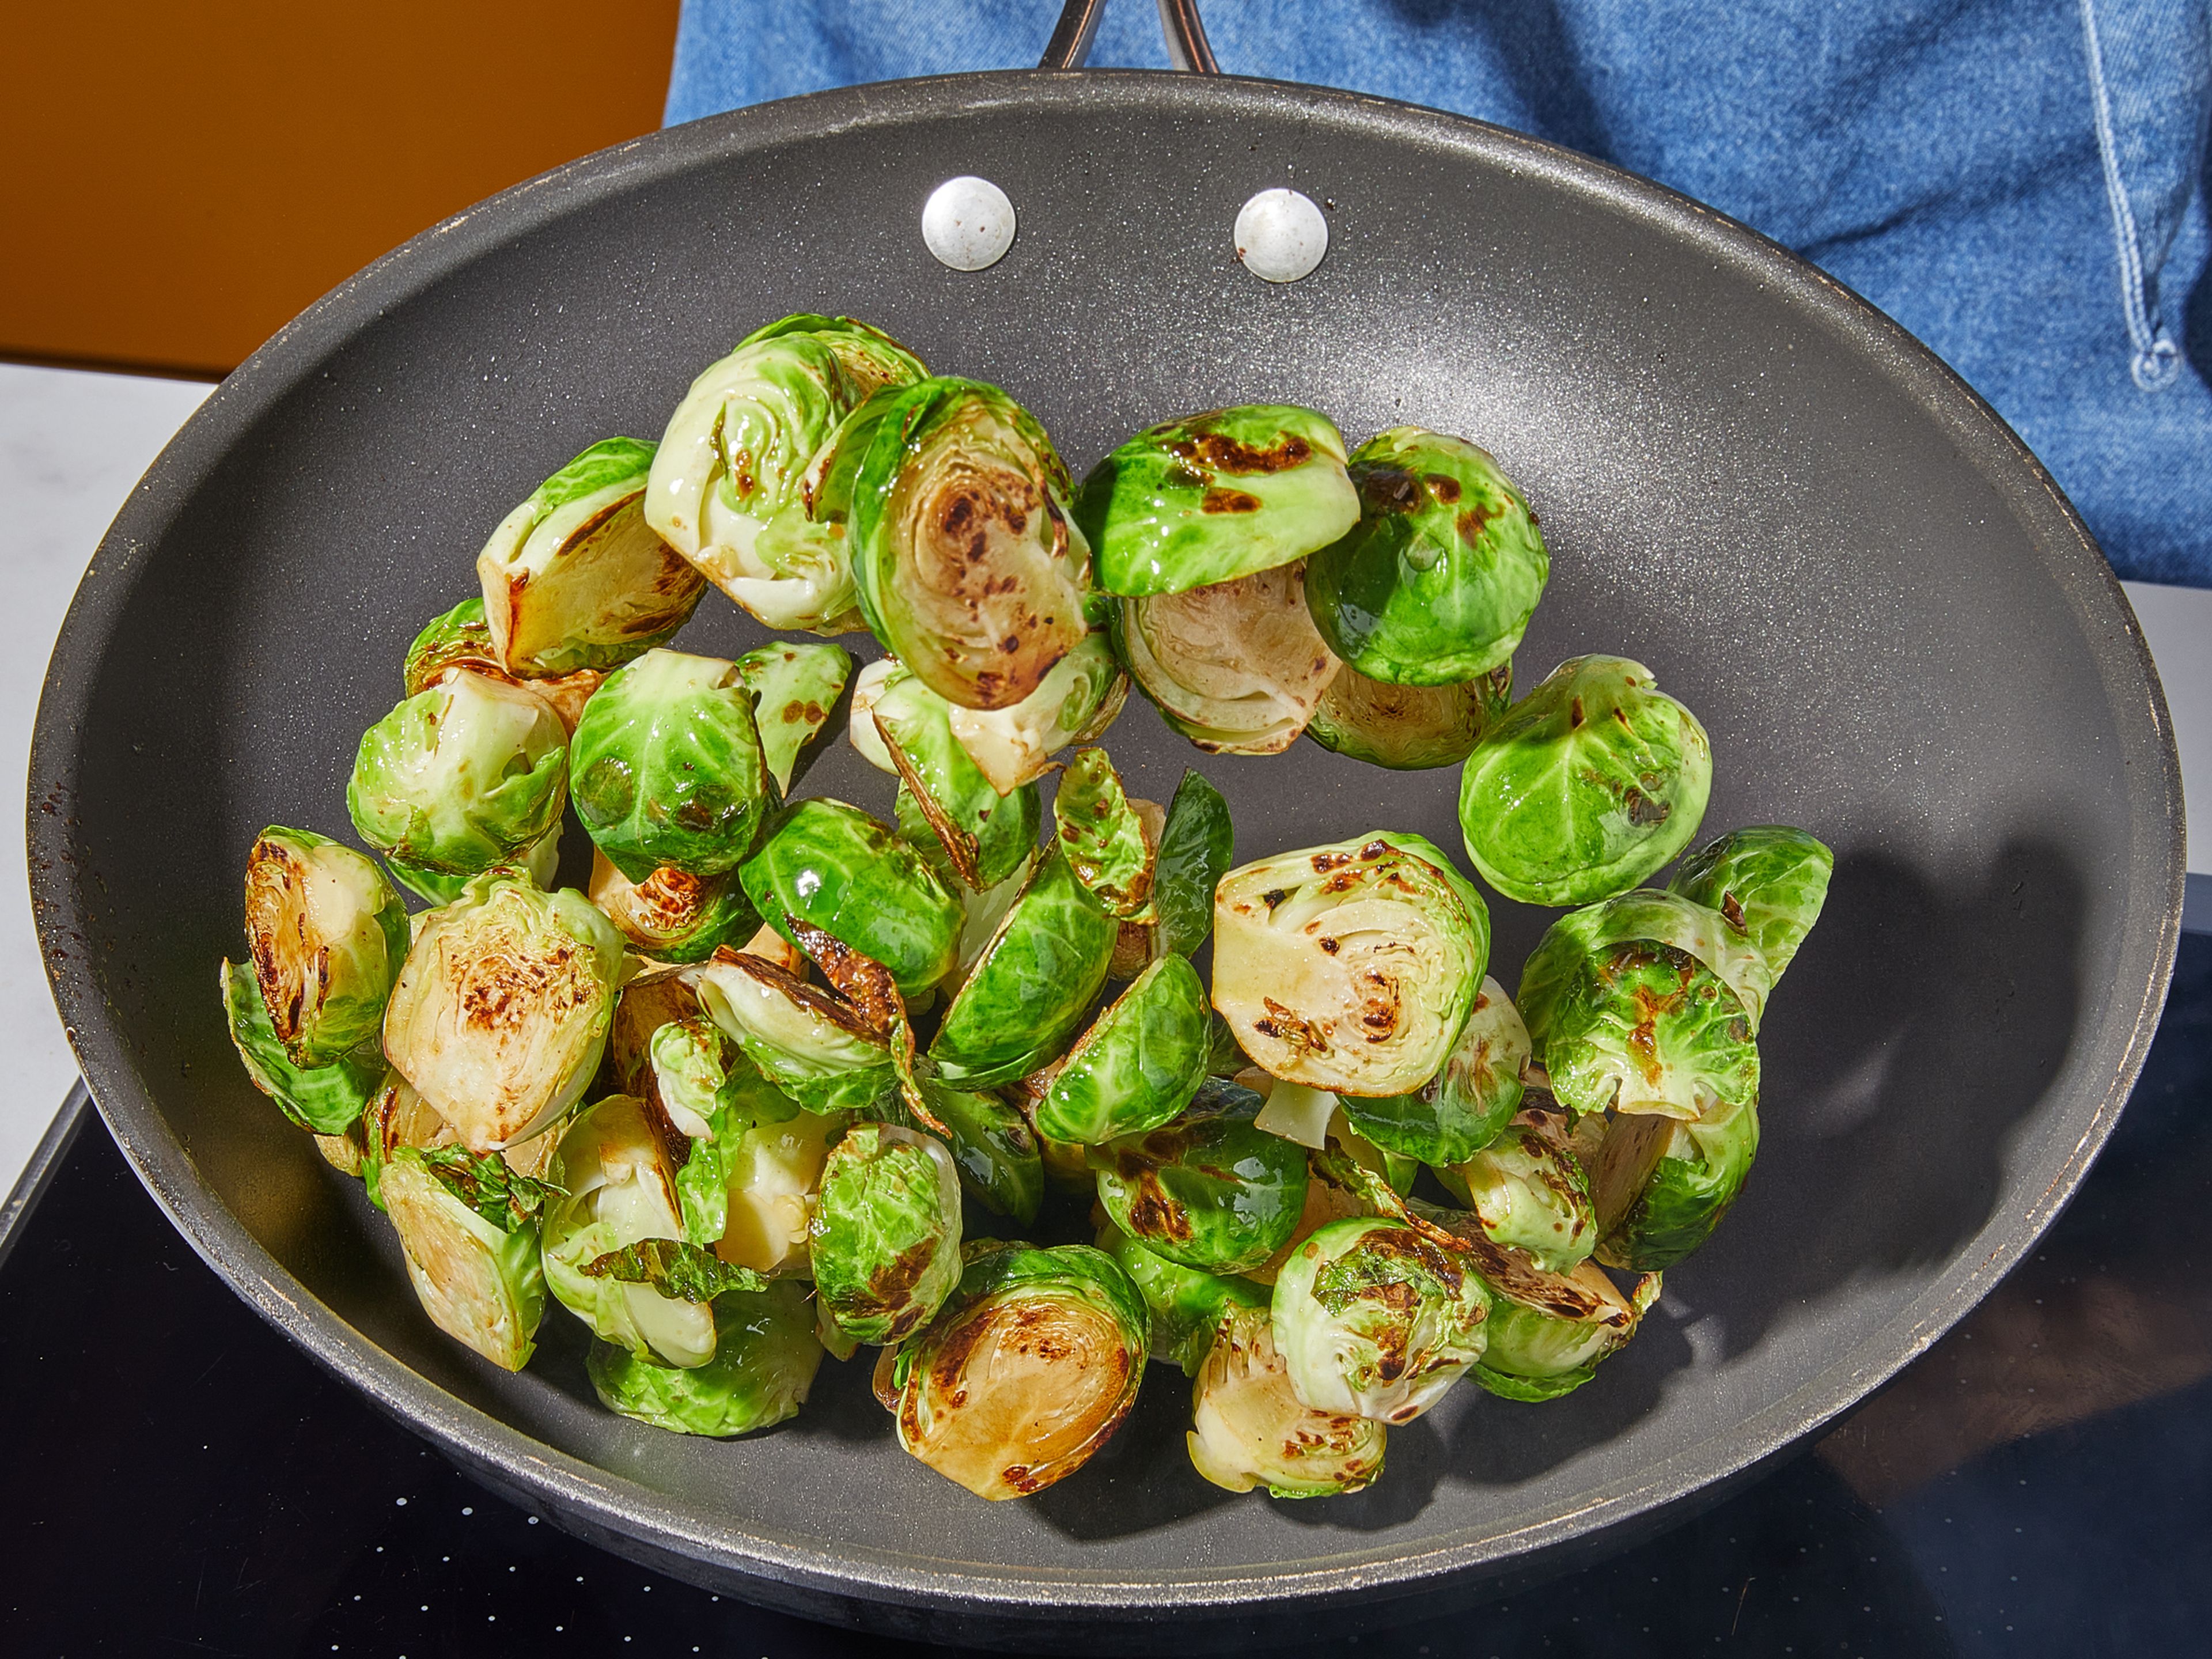 Add Brussels sprouts to the pan with the pancetta fat, season with salt and a little pepper, and roast until well browned at the edges, approx. 5 min. Then add water to the pan. If desired, add chili flakes, stir, and continue roasting for approx. 5 min. until the water is fully evaporated and the Brussels sprouts are tender, crispy and slightly charred. Remove Brussels sprouts from the pan and set aside.